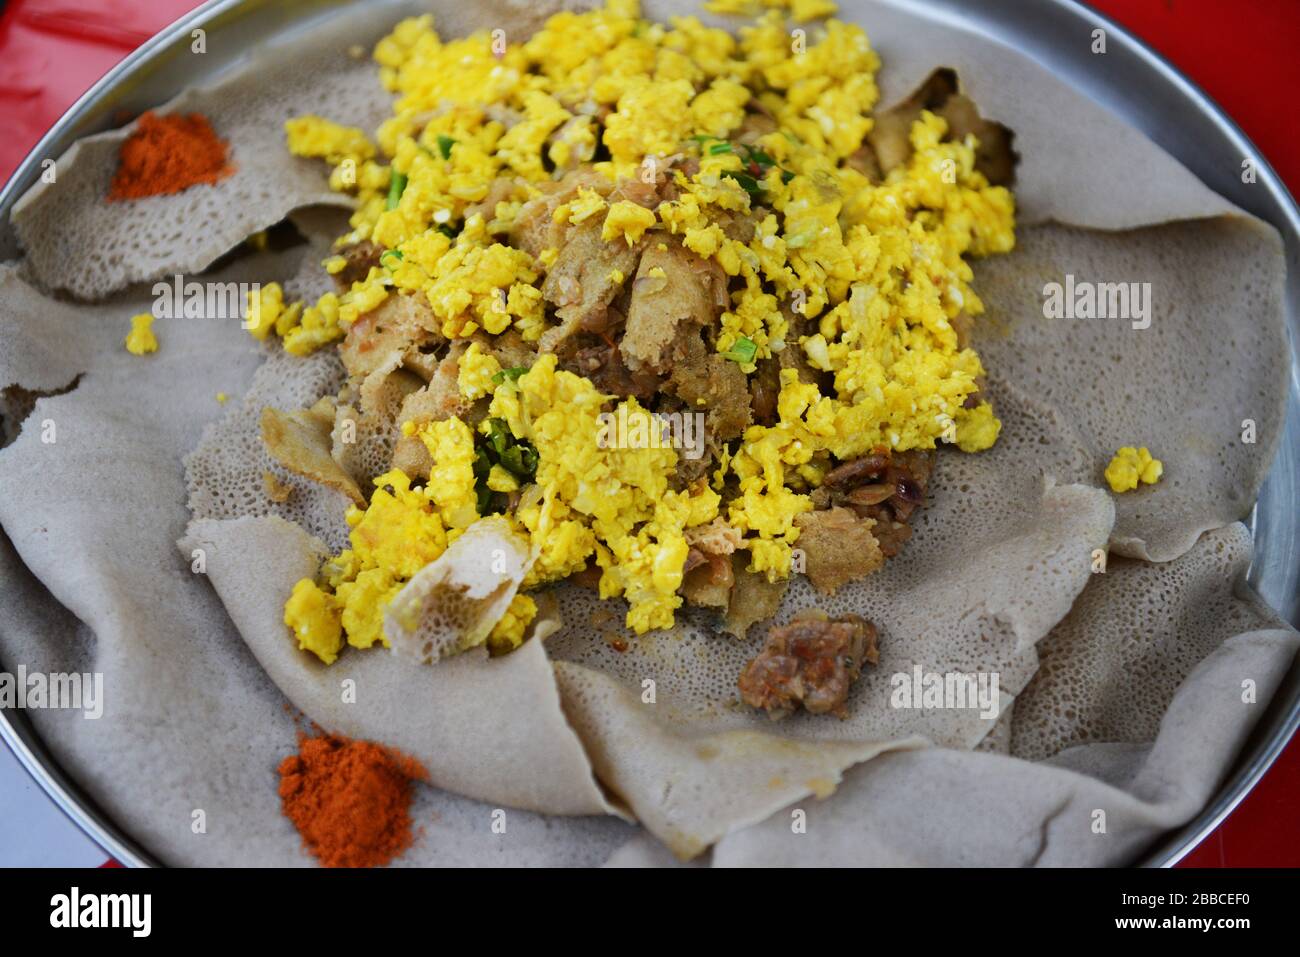 Firfir with scramble eggs is a popular breakfast in Ethiopia. Stock Photo